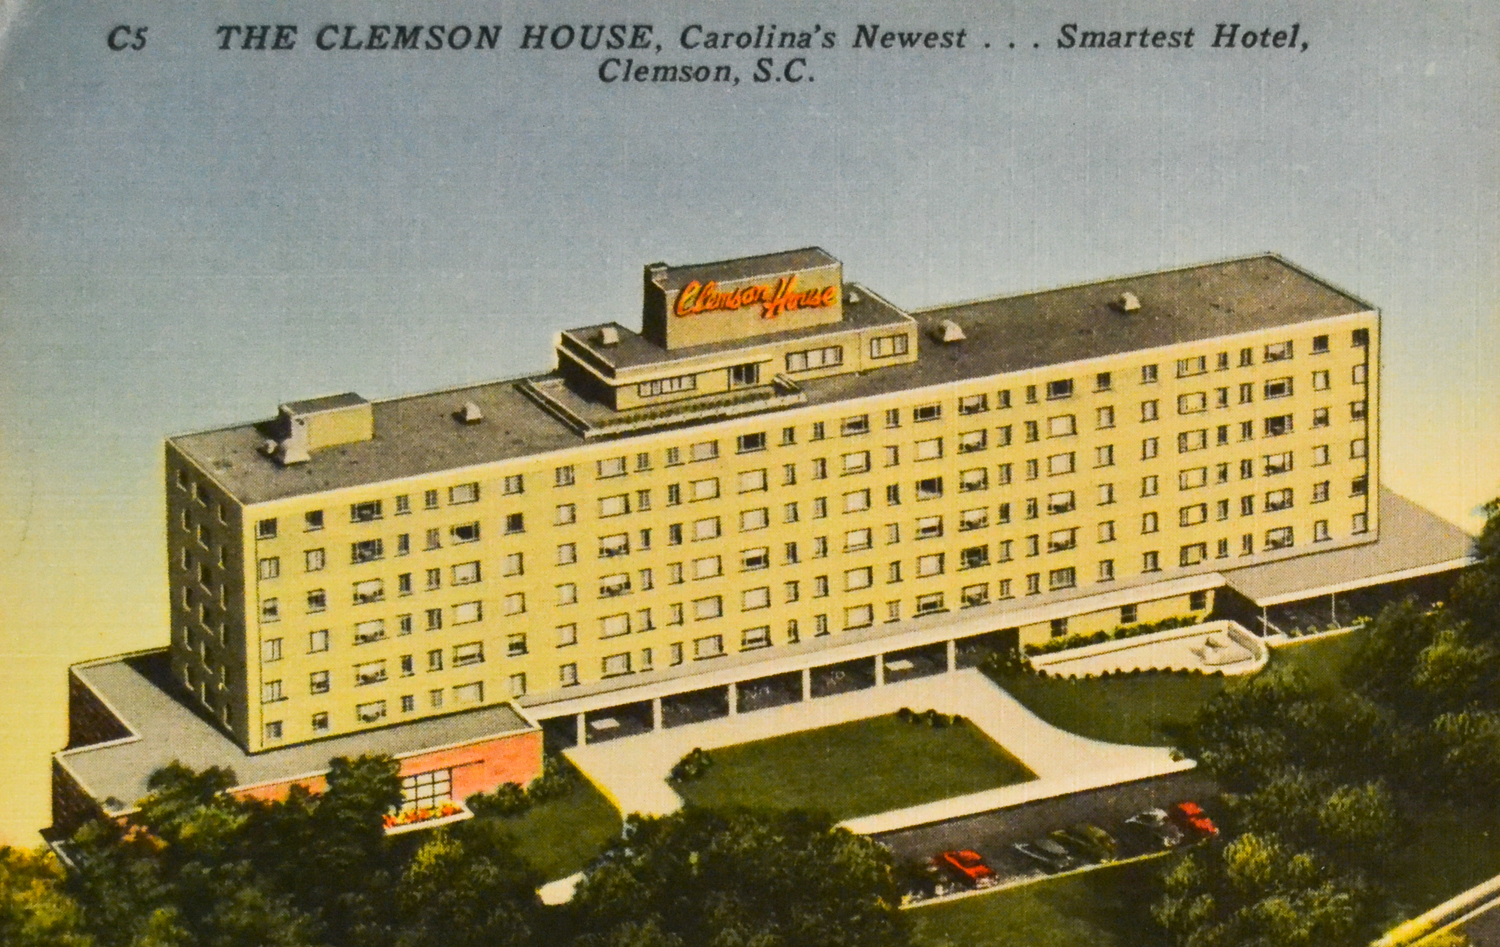 ENLARGEABLE IMAGES OF CLEMSON